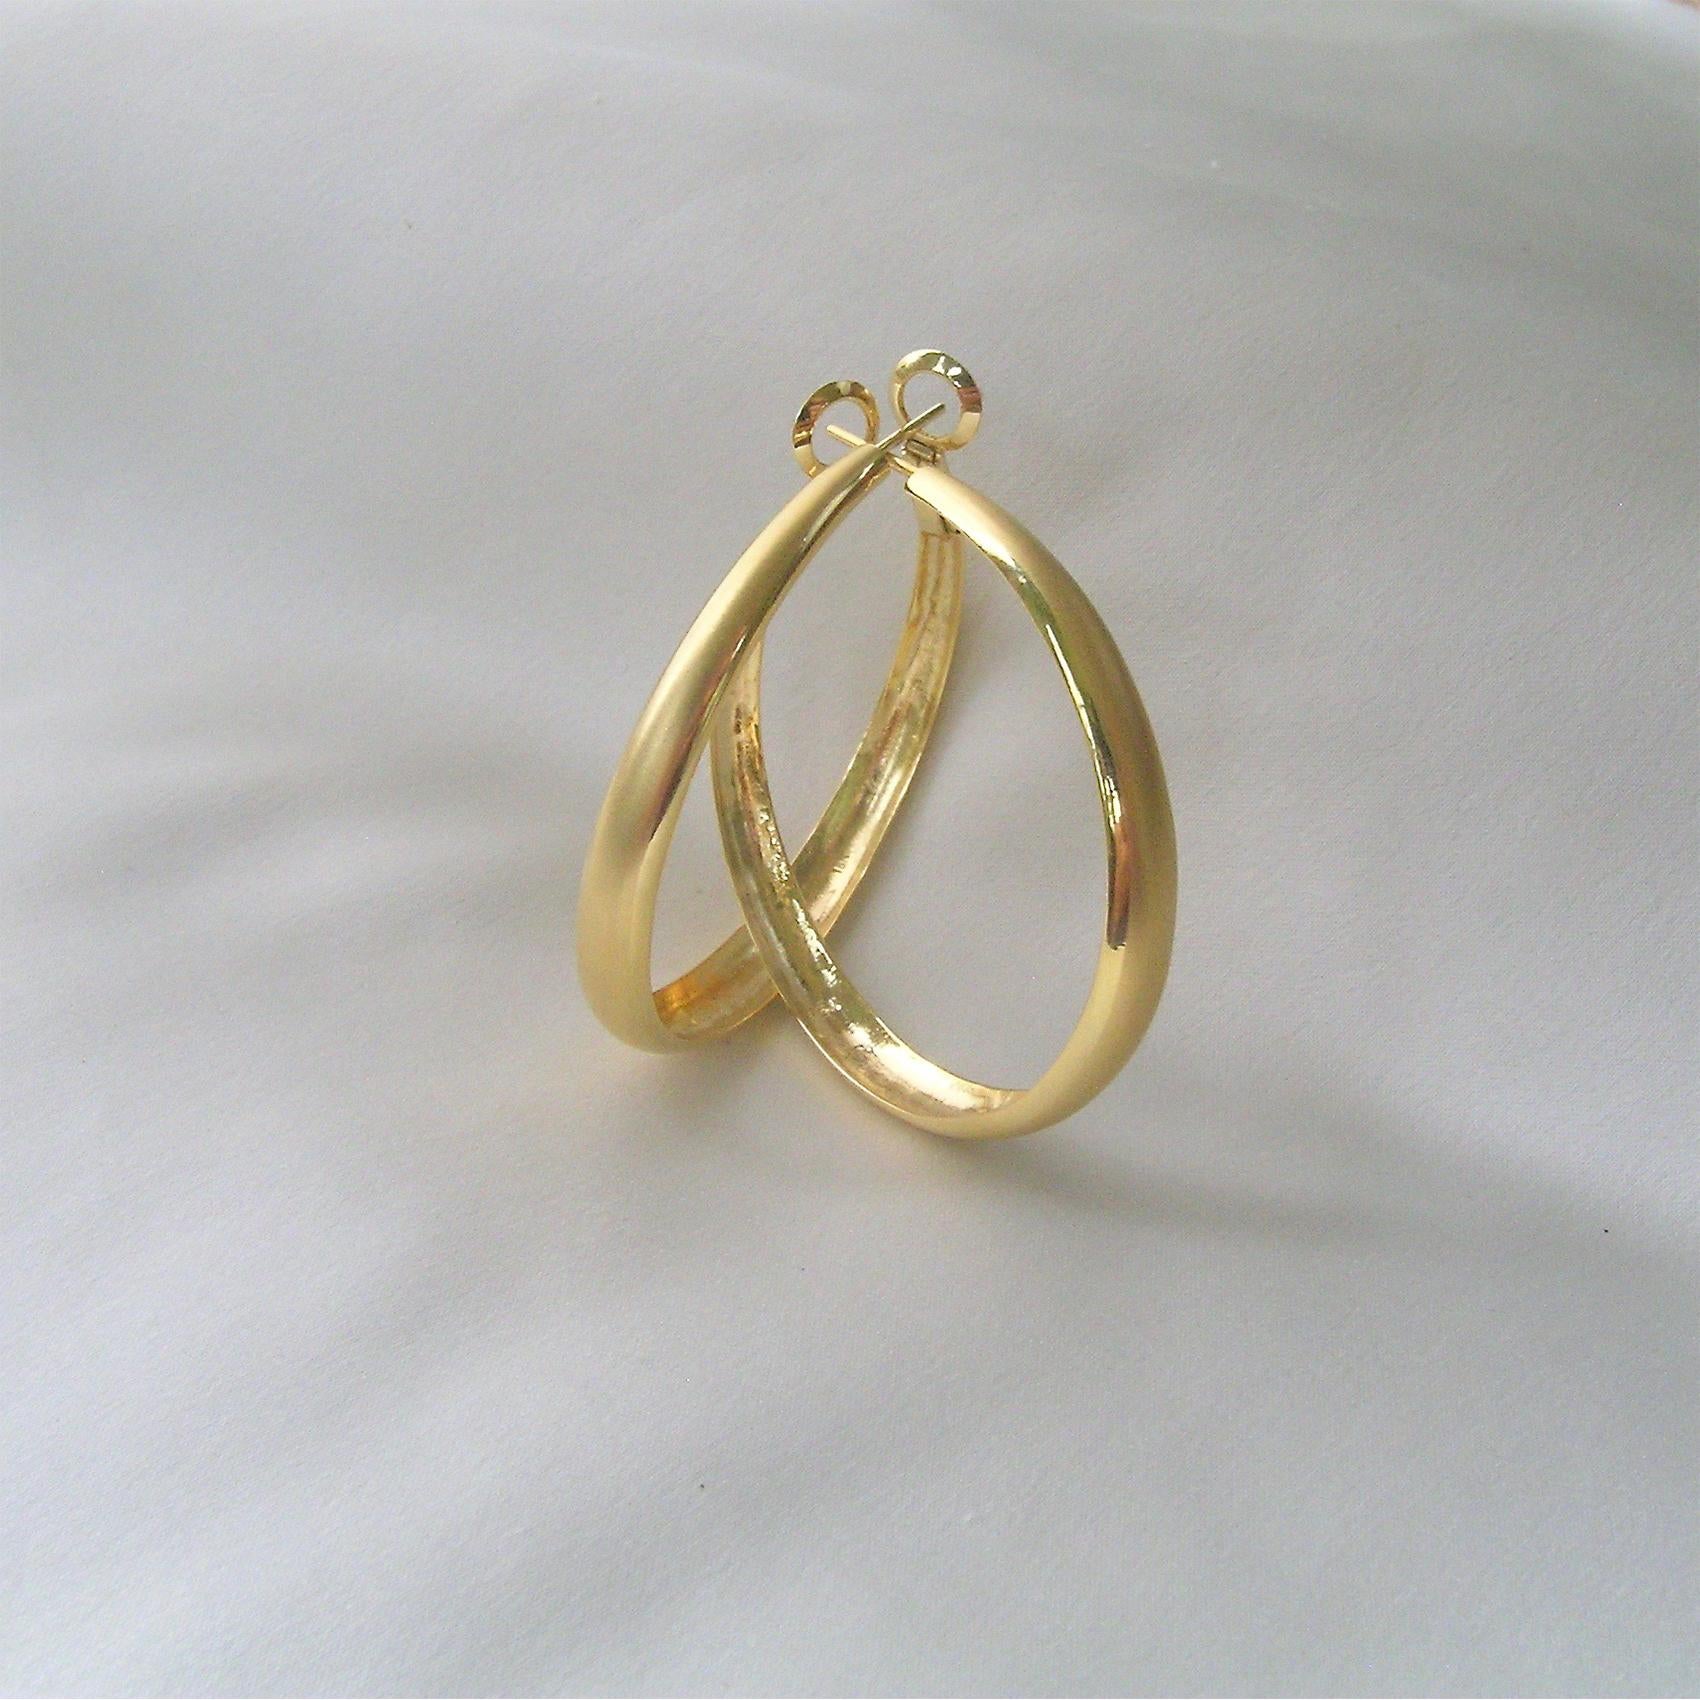 This version of a hoop earring is different in that there is a lot of gold shown in the wide, slightly curved front of the earring.  Most hoops are thin or consistent width all the way around.  These taper to the back so that they are super light on